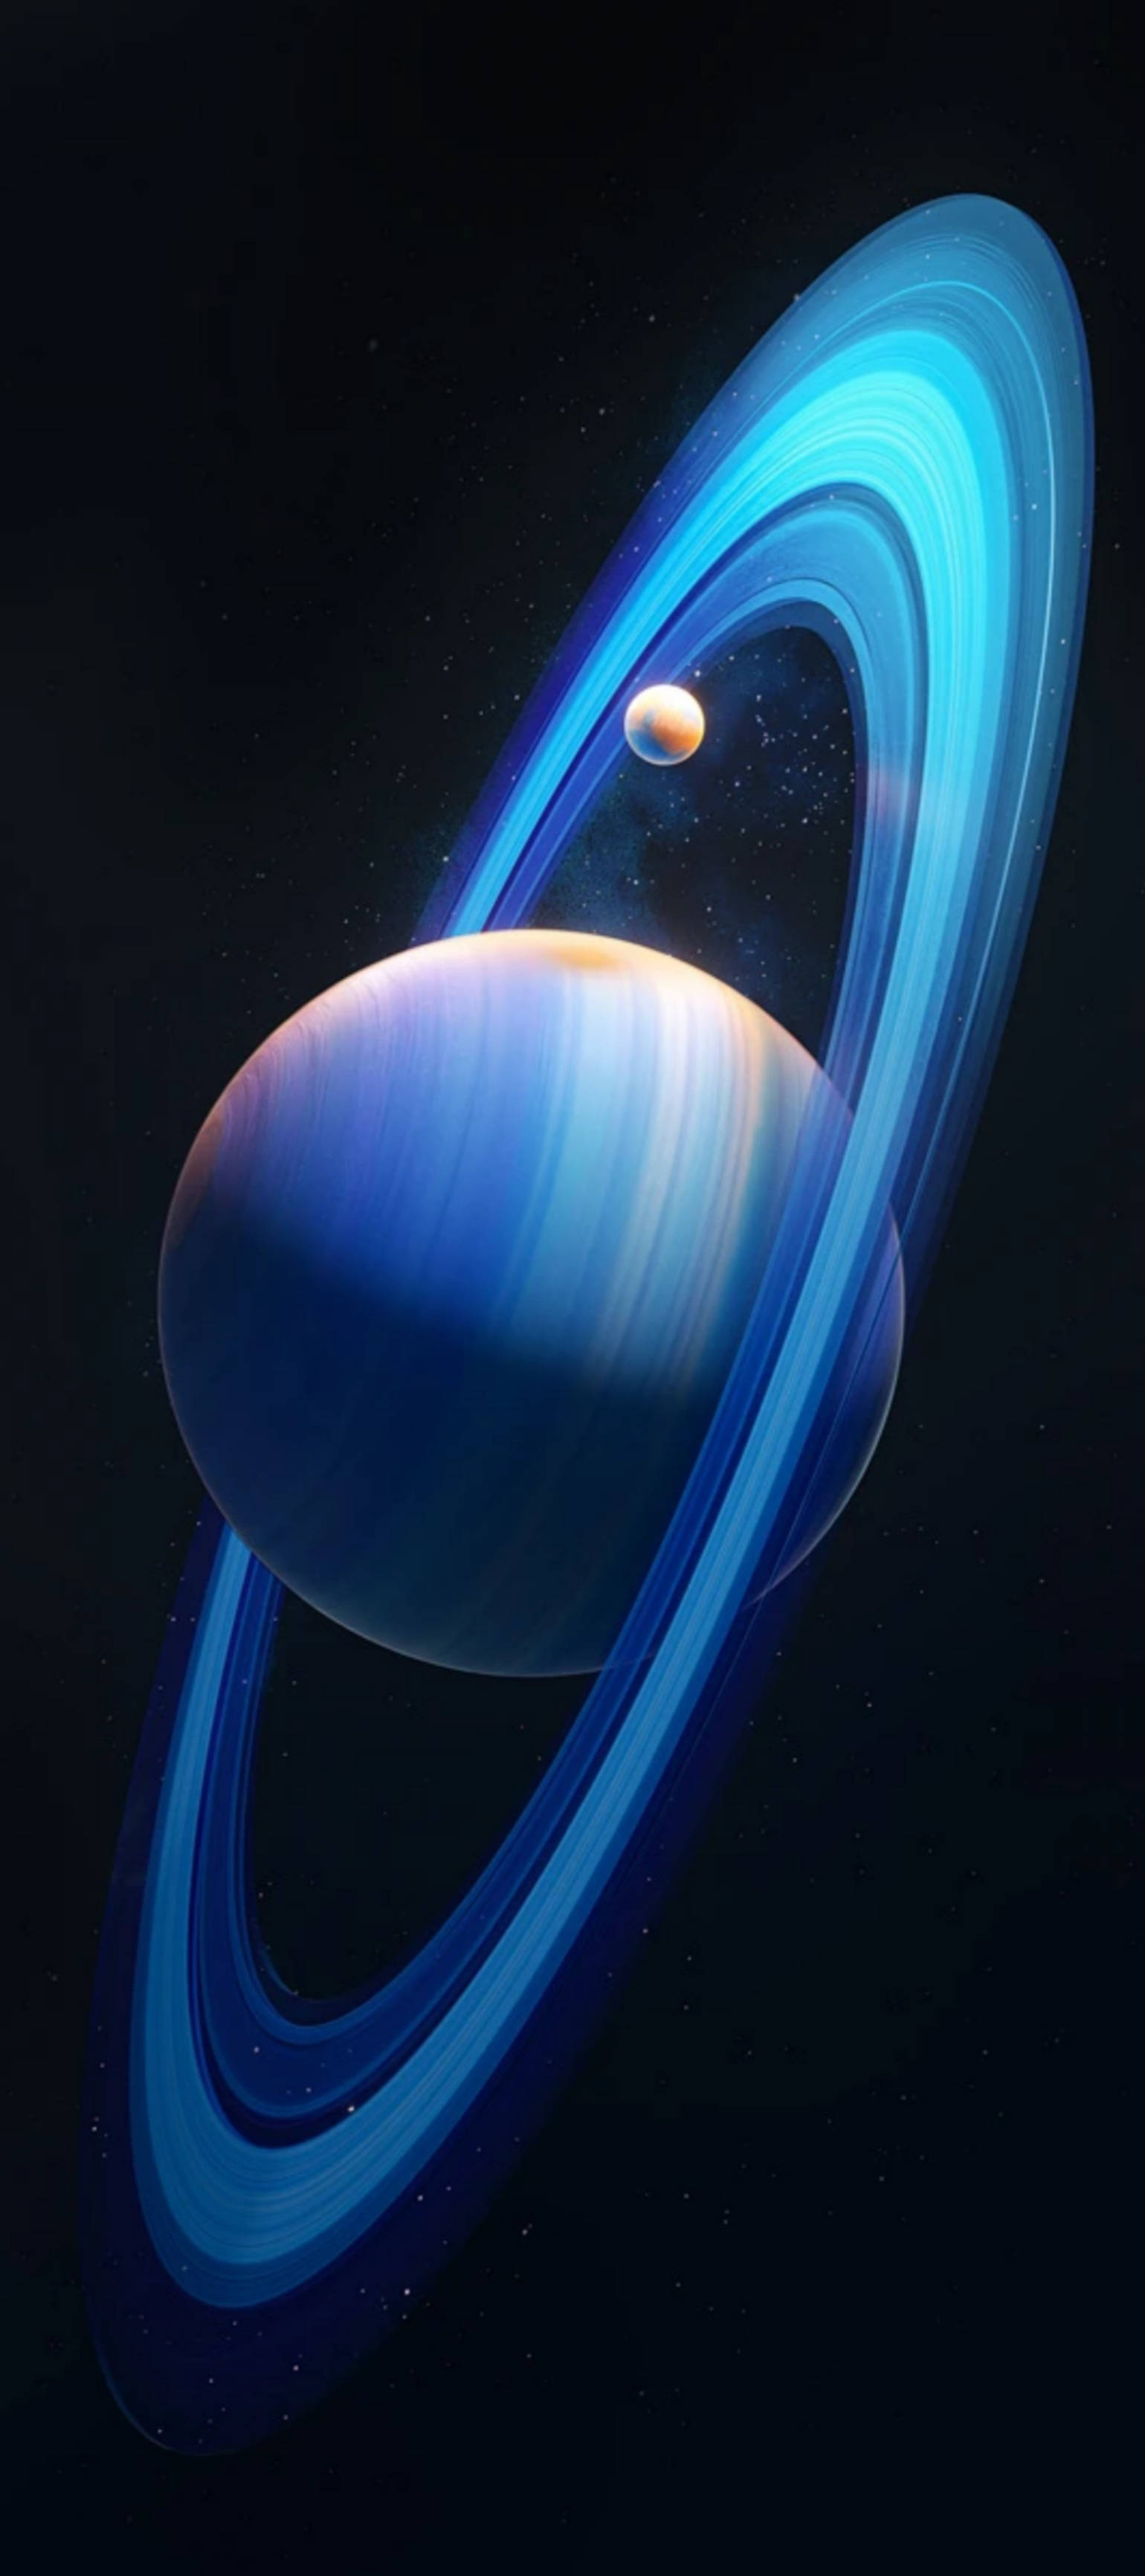 Infinix Zero In Unique Ultra Blue Design Against A Background Of The Saturn Planet Background